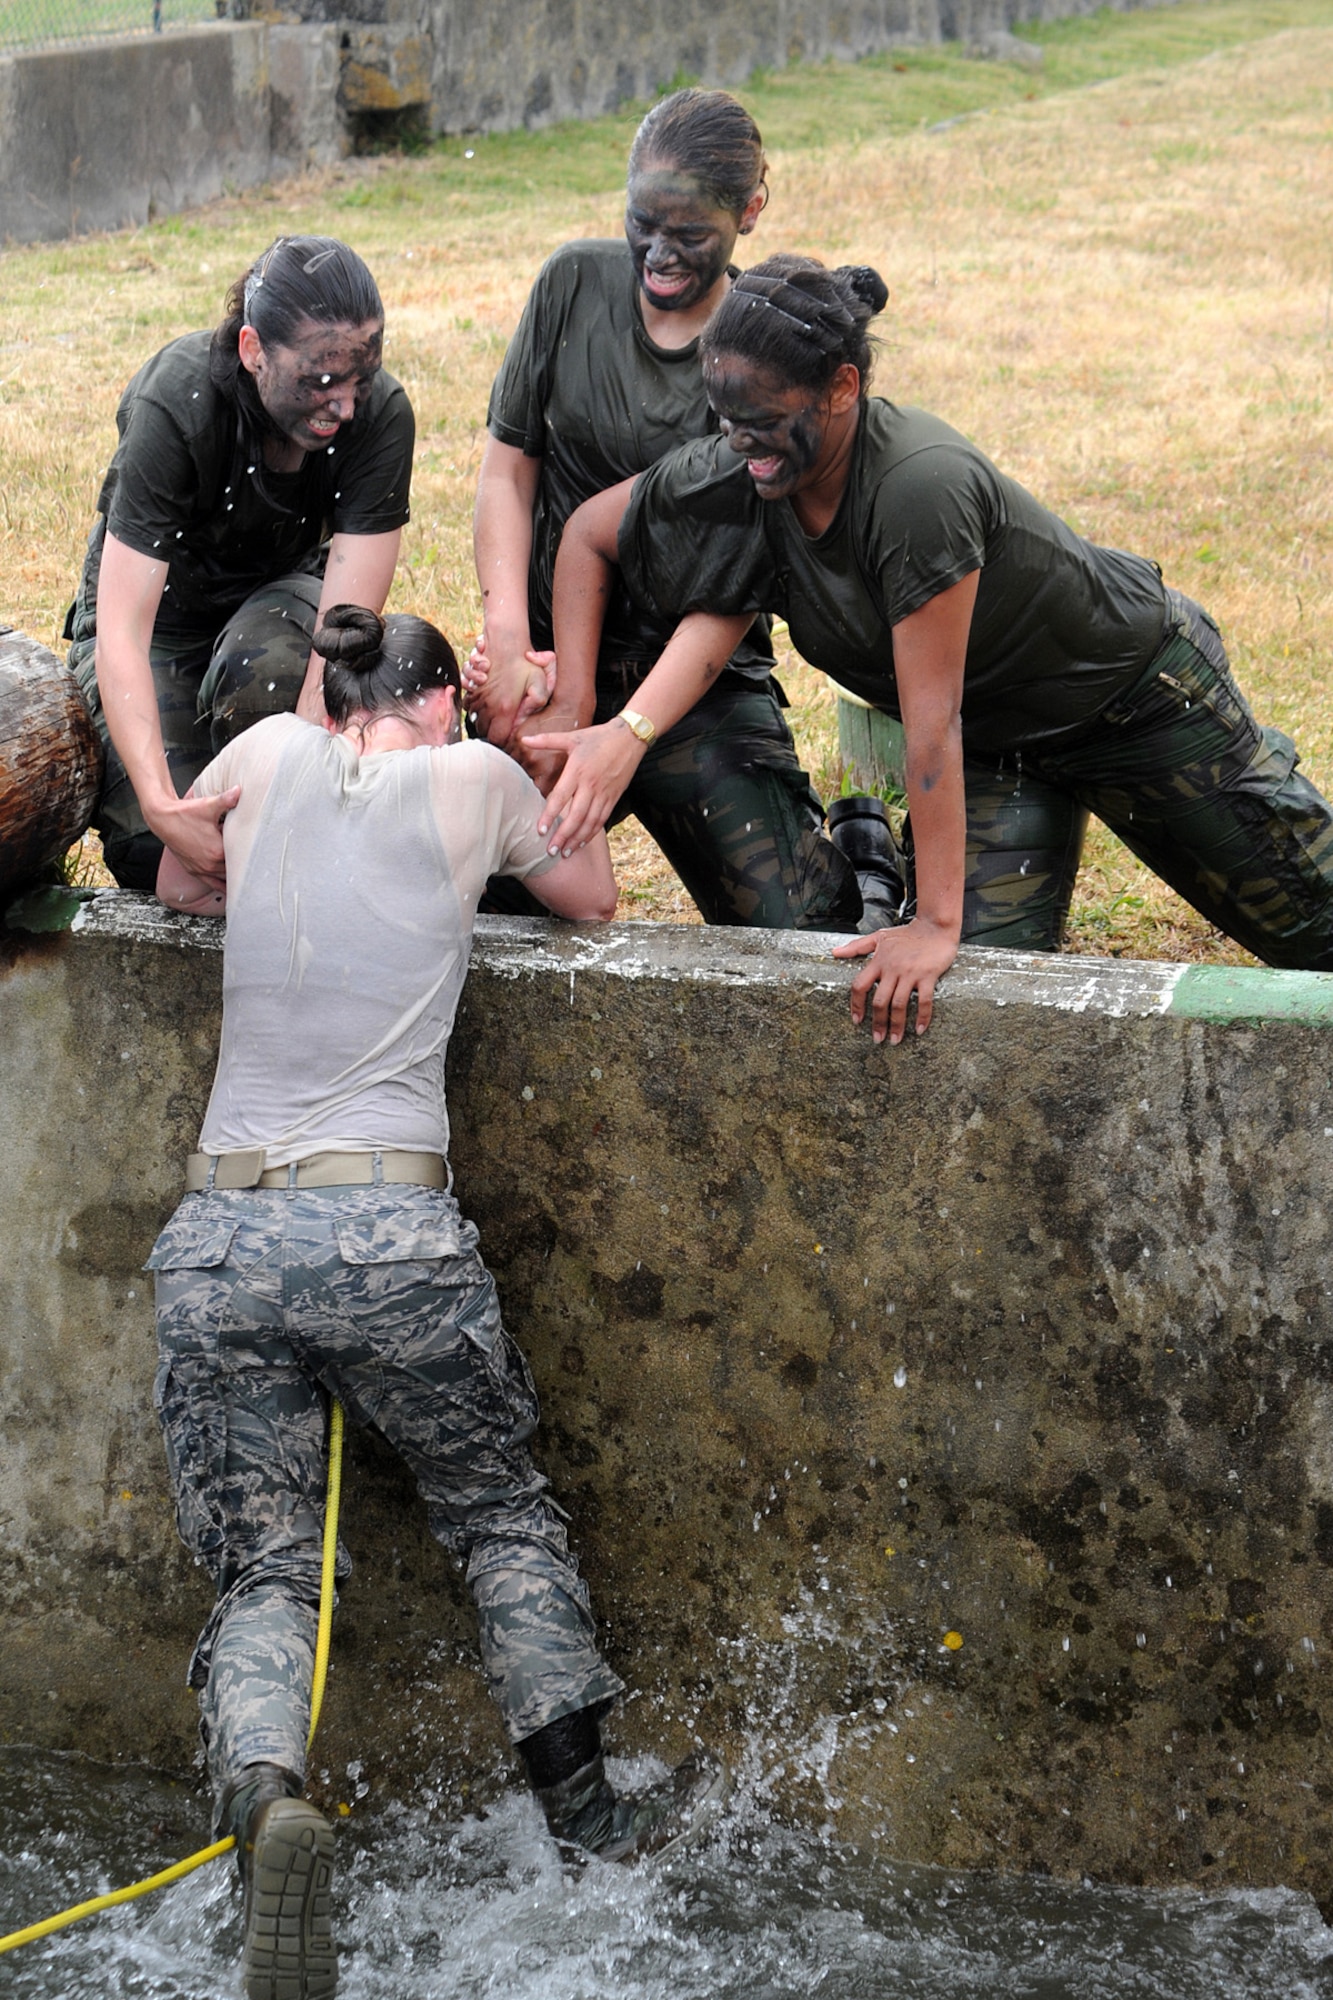 U.S. and Portuguese airmen compete in the Defender Challenge May 30, 2014, at Lajes Field, Azores, Portugal.  The Portuguese air force held the challenge in celebration of the 59th anniversary of the Air Police Squadron. The challenge tested the airmen’s strength, endurance and ability to work together to accomplish tasks. (U.S. Air Force photo/Guido Melo)